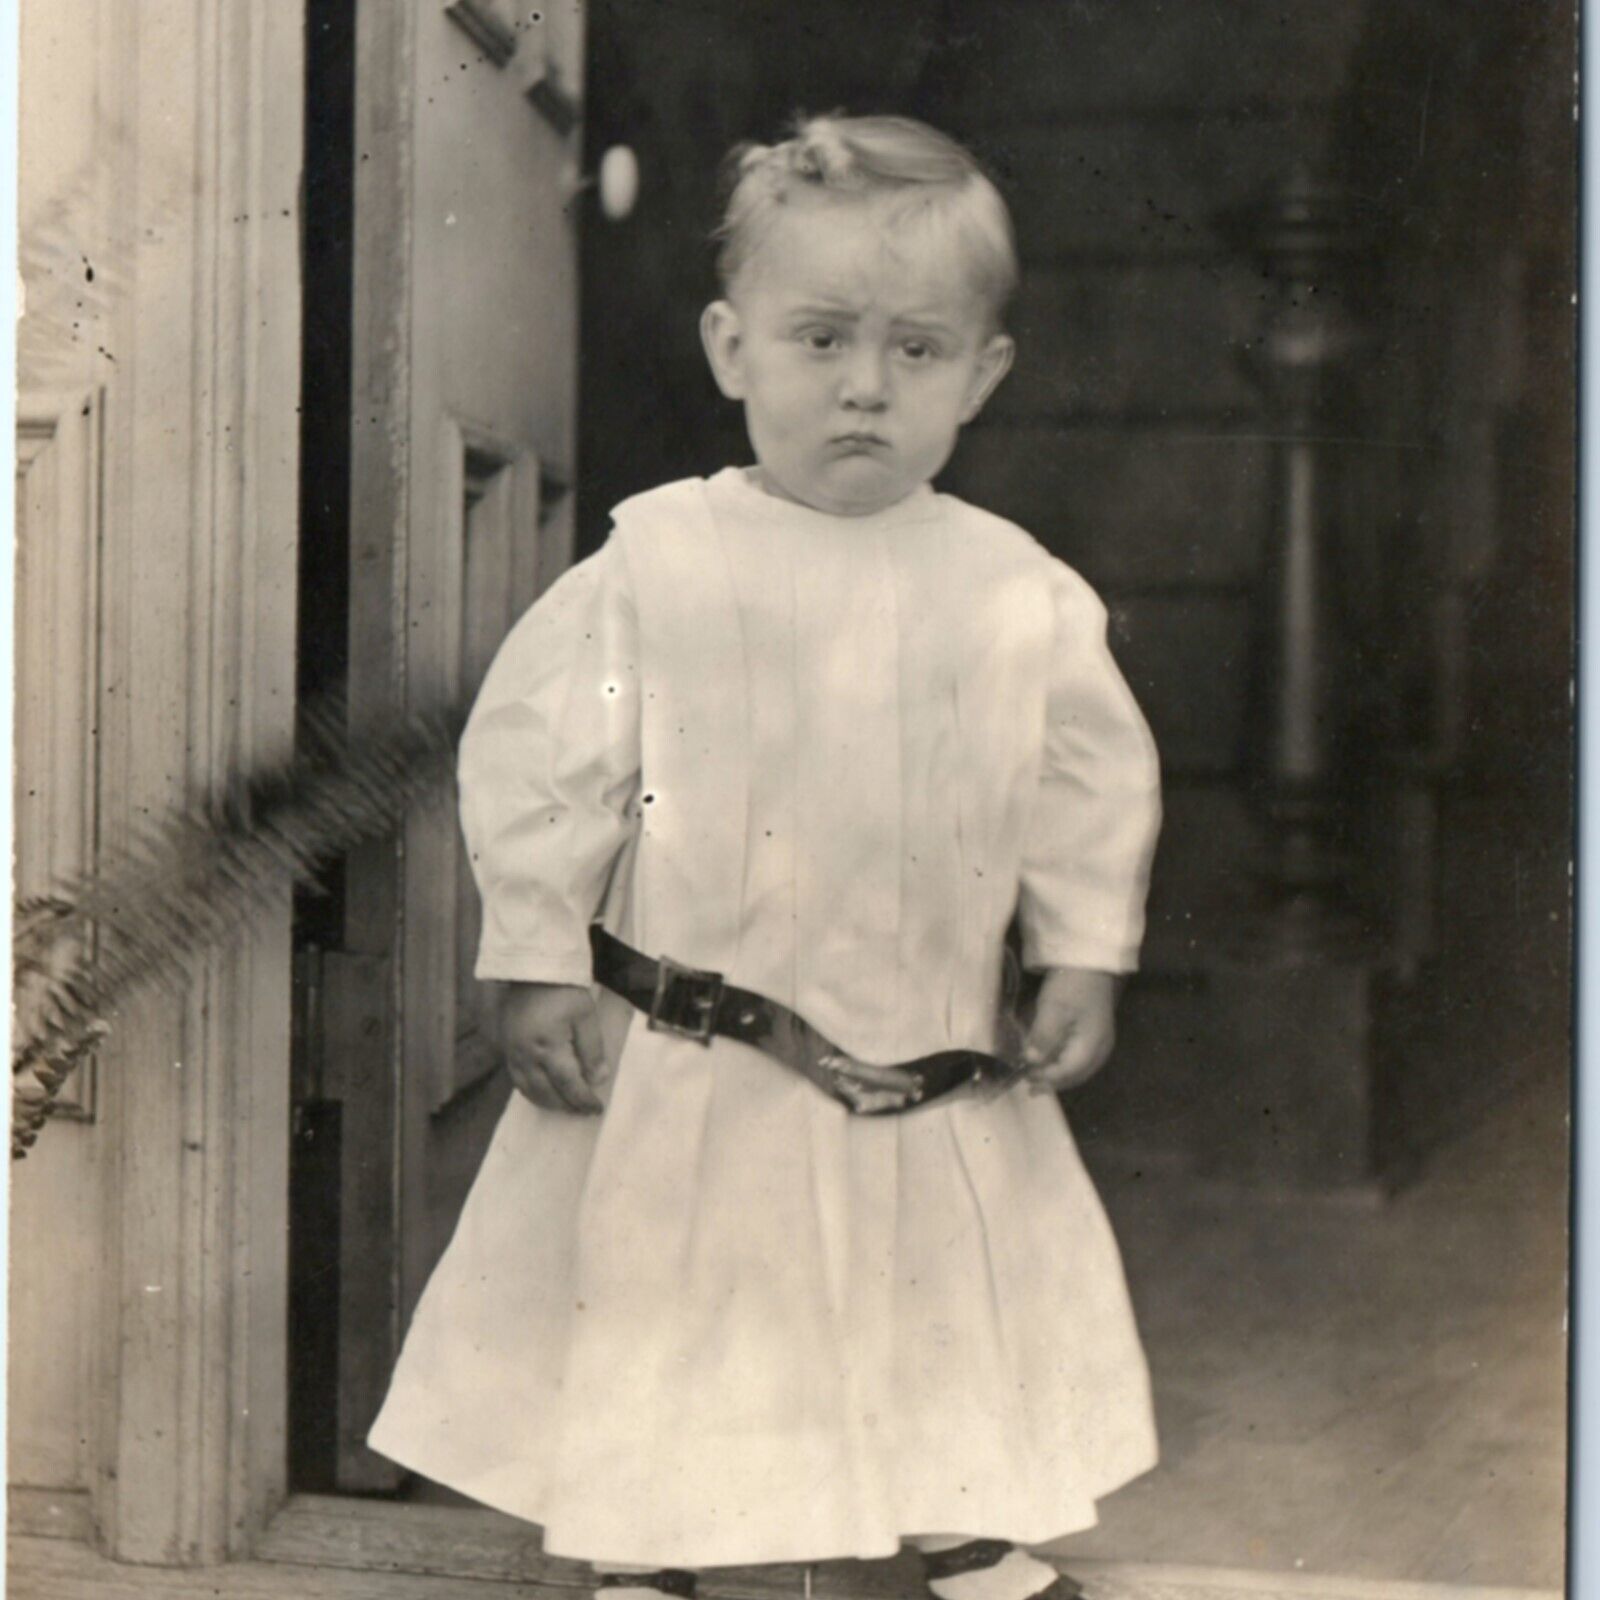 c1910s Standing Baby Boy? in Dress RPPC Cute Serious Child Real Photo PC A139